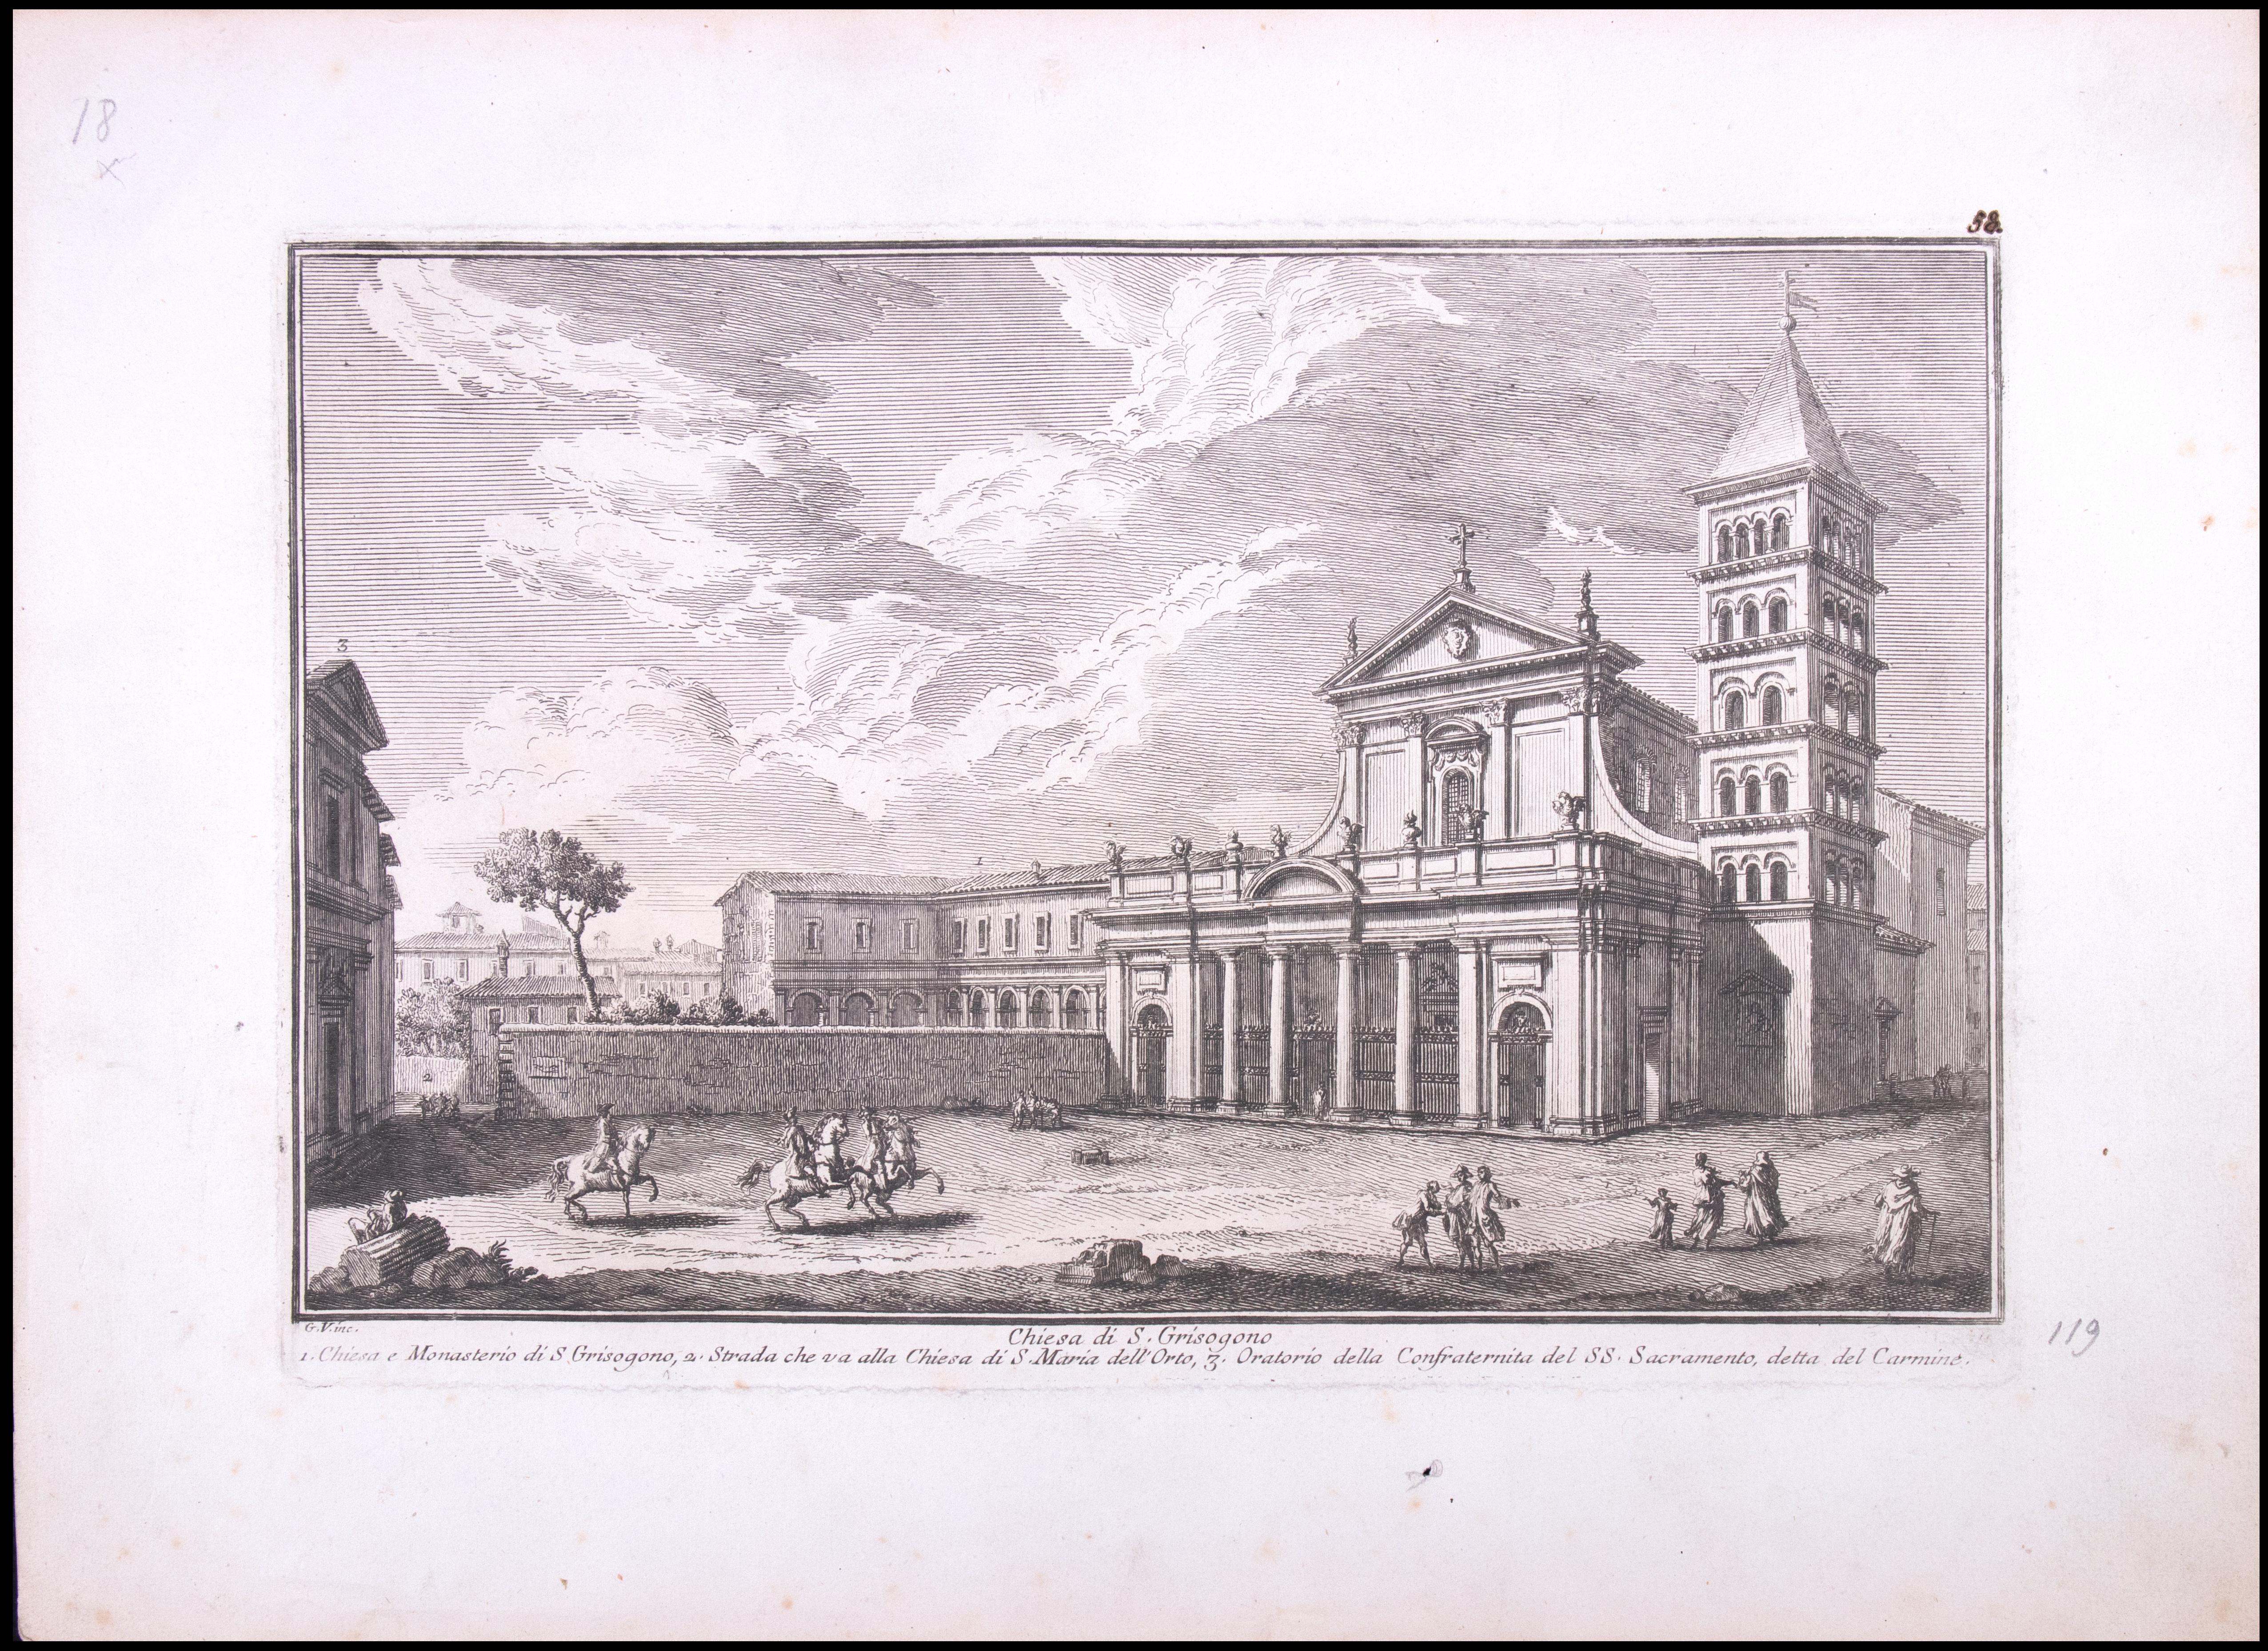 Chiesa di S. Grisogono is an original etching of the Late 18th century realized by Giuseppe Vasi.

Signed and titled on plate lower margin. 

Good conditions except for consumed margins.

Giuseppe Vasi  (Corleone,1710 - Rome, 1782) was an engraver,